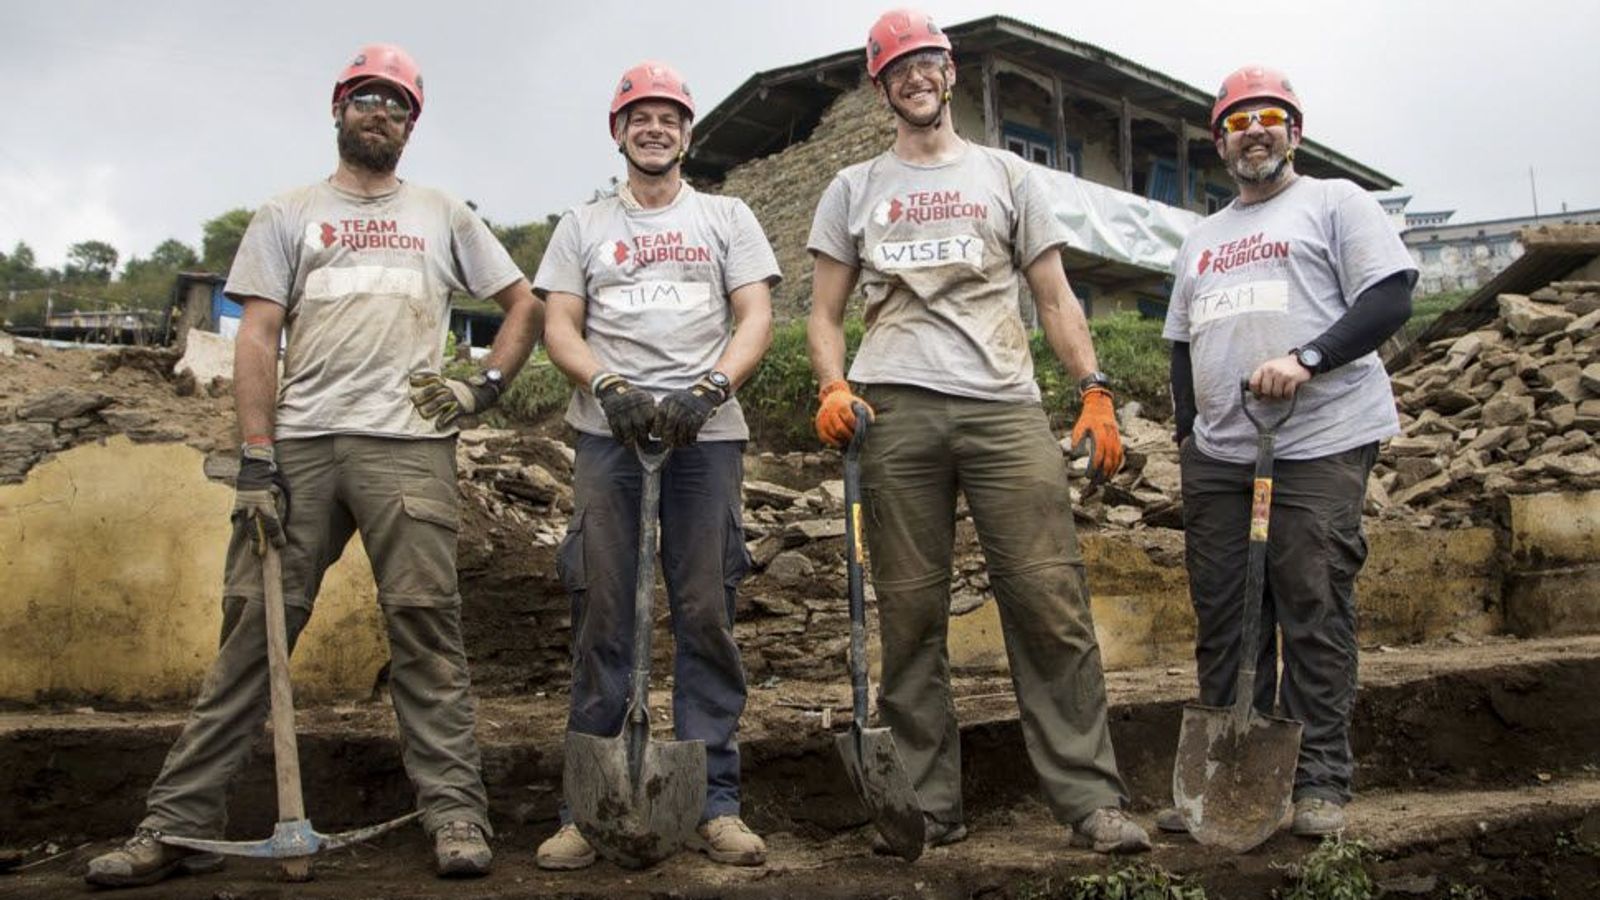 Team Rubicon: Where the Skills of Veterans Meet the Needs of the World